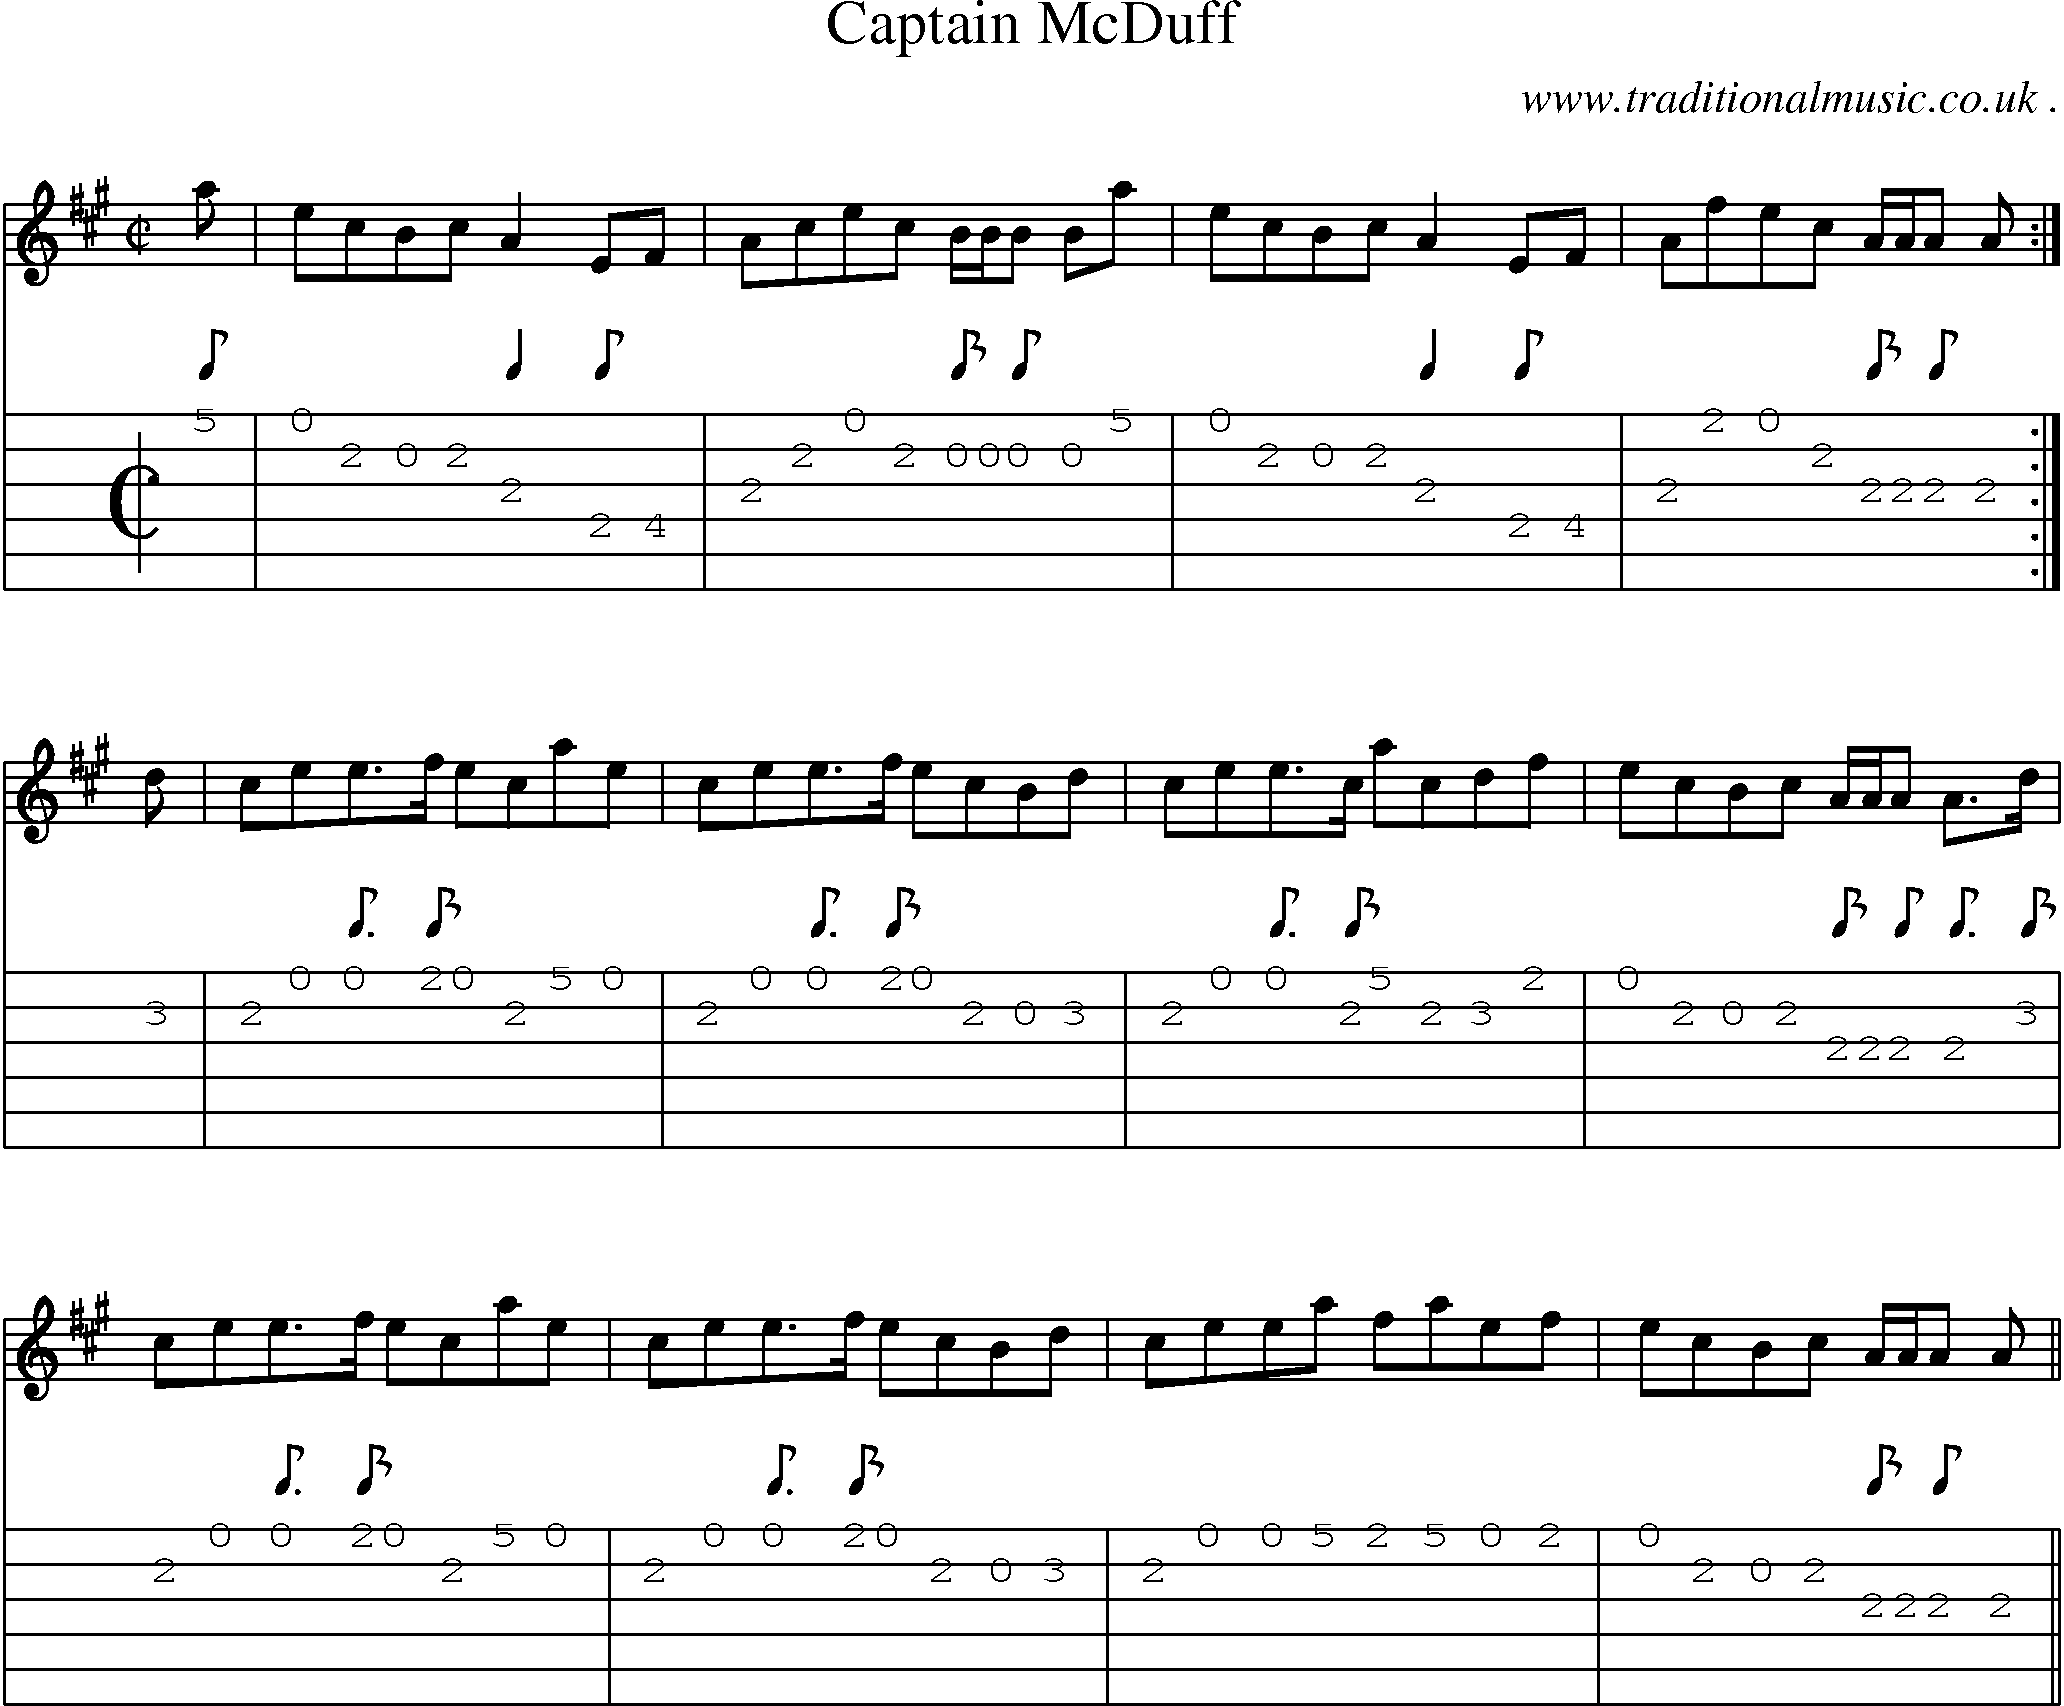 Sheet-music  score, Chords and Guitar Tabs for Captain Mcduff